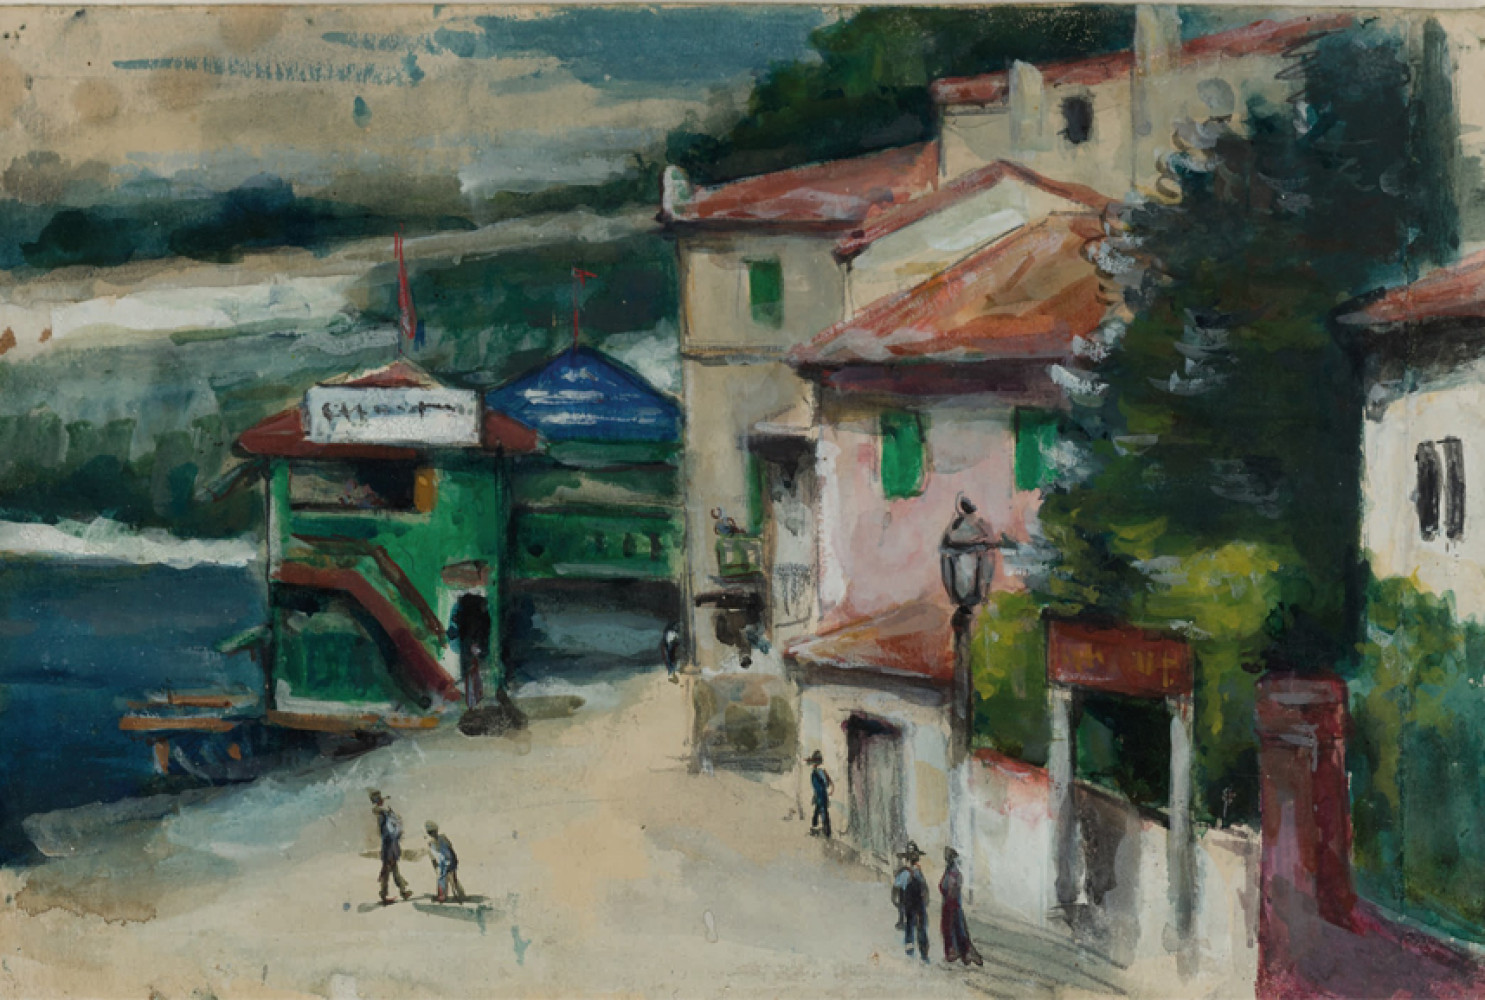 LE RESTAURANT MISTRAL À L'ESTAQUE ,circa 1870, by Paul Cézanne (French, 1839-1906). Gouache, watercolor and pencil on paper, 9 1/8 by 14 inches. Loan courtesy of a private collection.
Private Collection